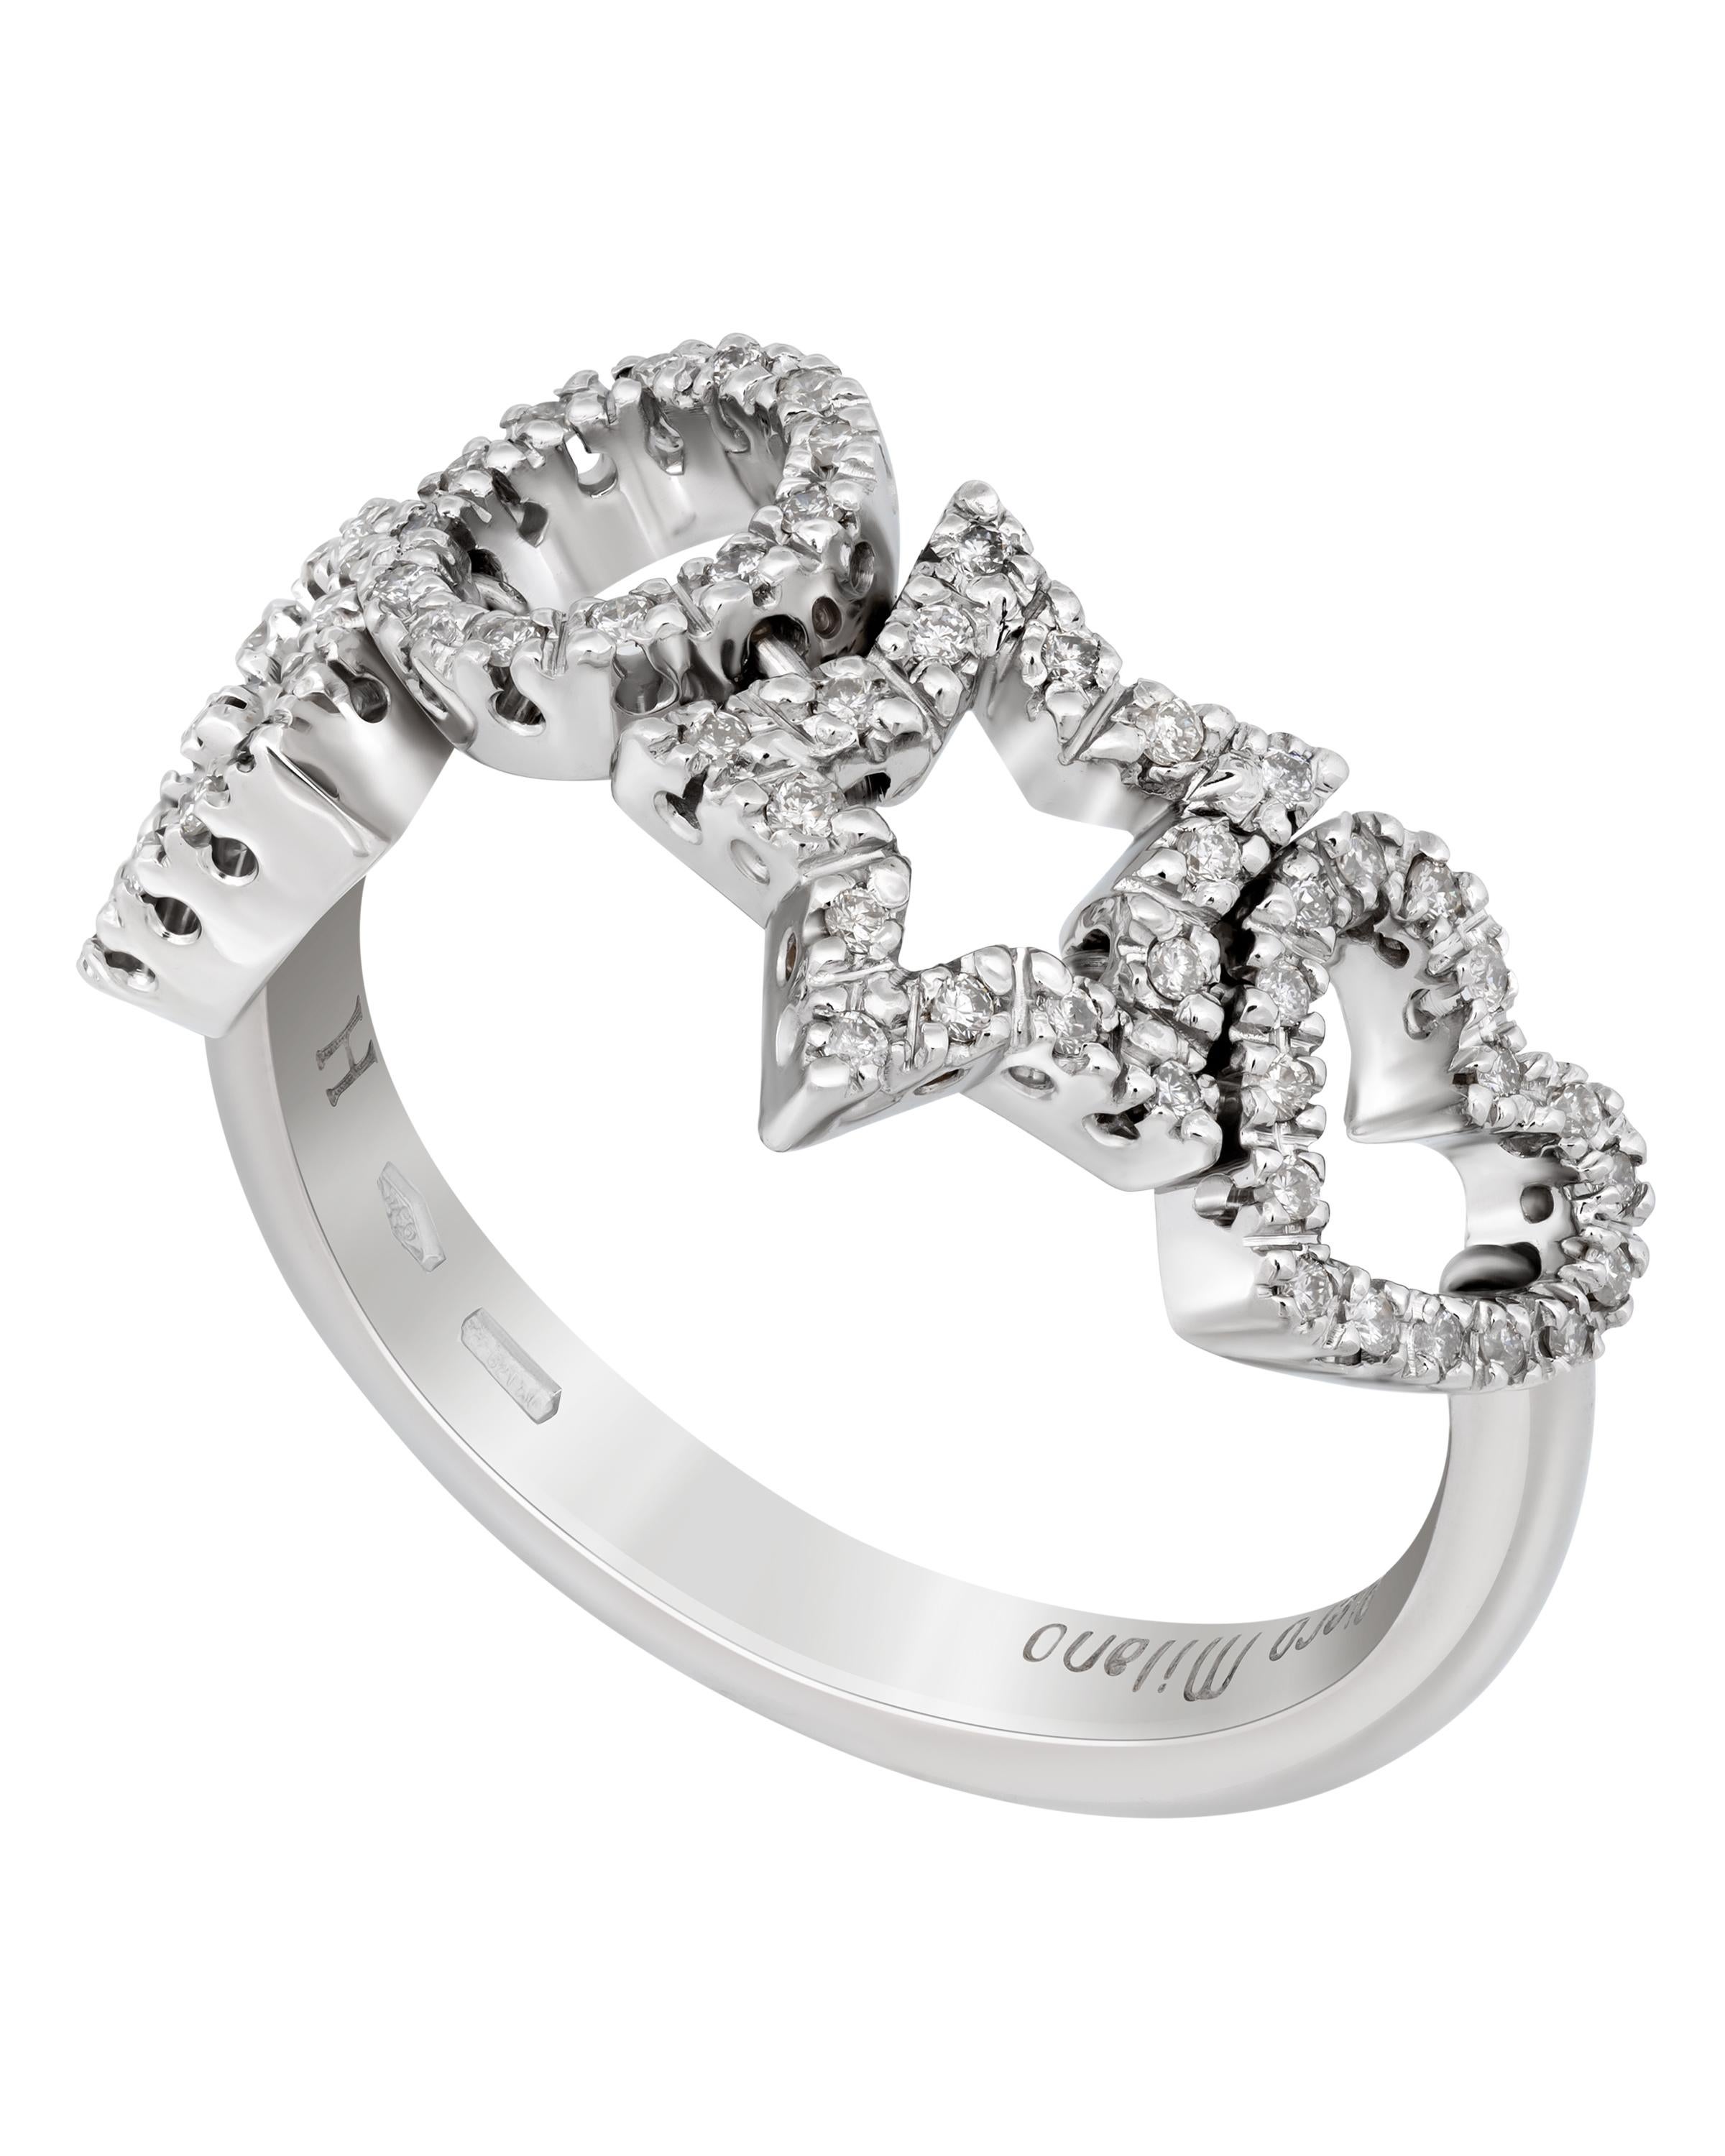 This playful Piero Milano 18K White Gold Band Ring features open work designs adorned with glittering diamonds 0.23ct. tw. in a shared prong setting. The ring size is 7.75 (56.3). The Band Width is 7.7mm. The Weight is 6.9g. Diamond Color: G-H.